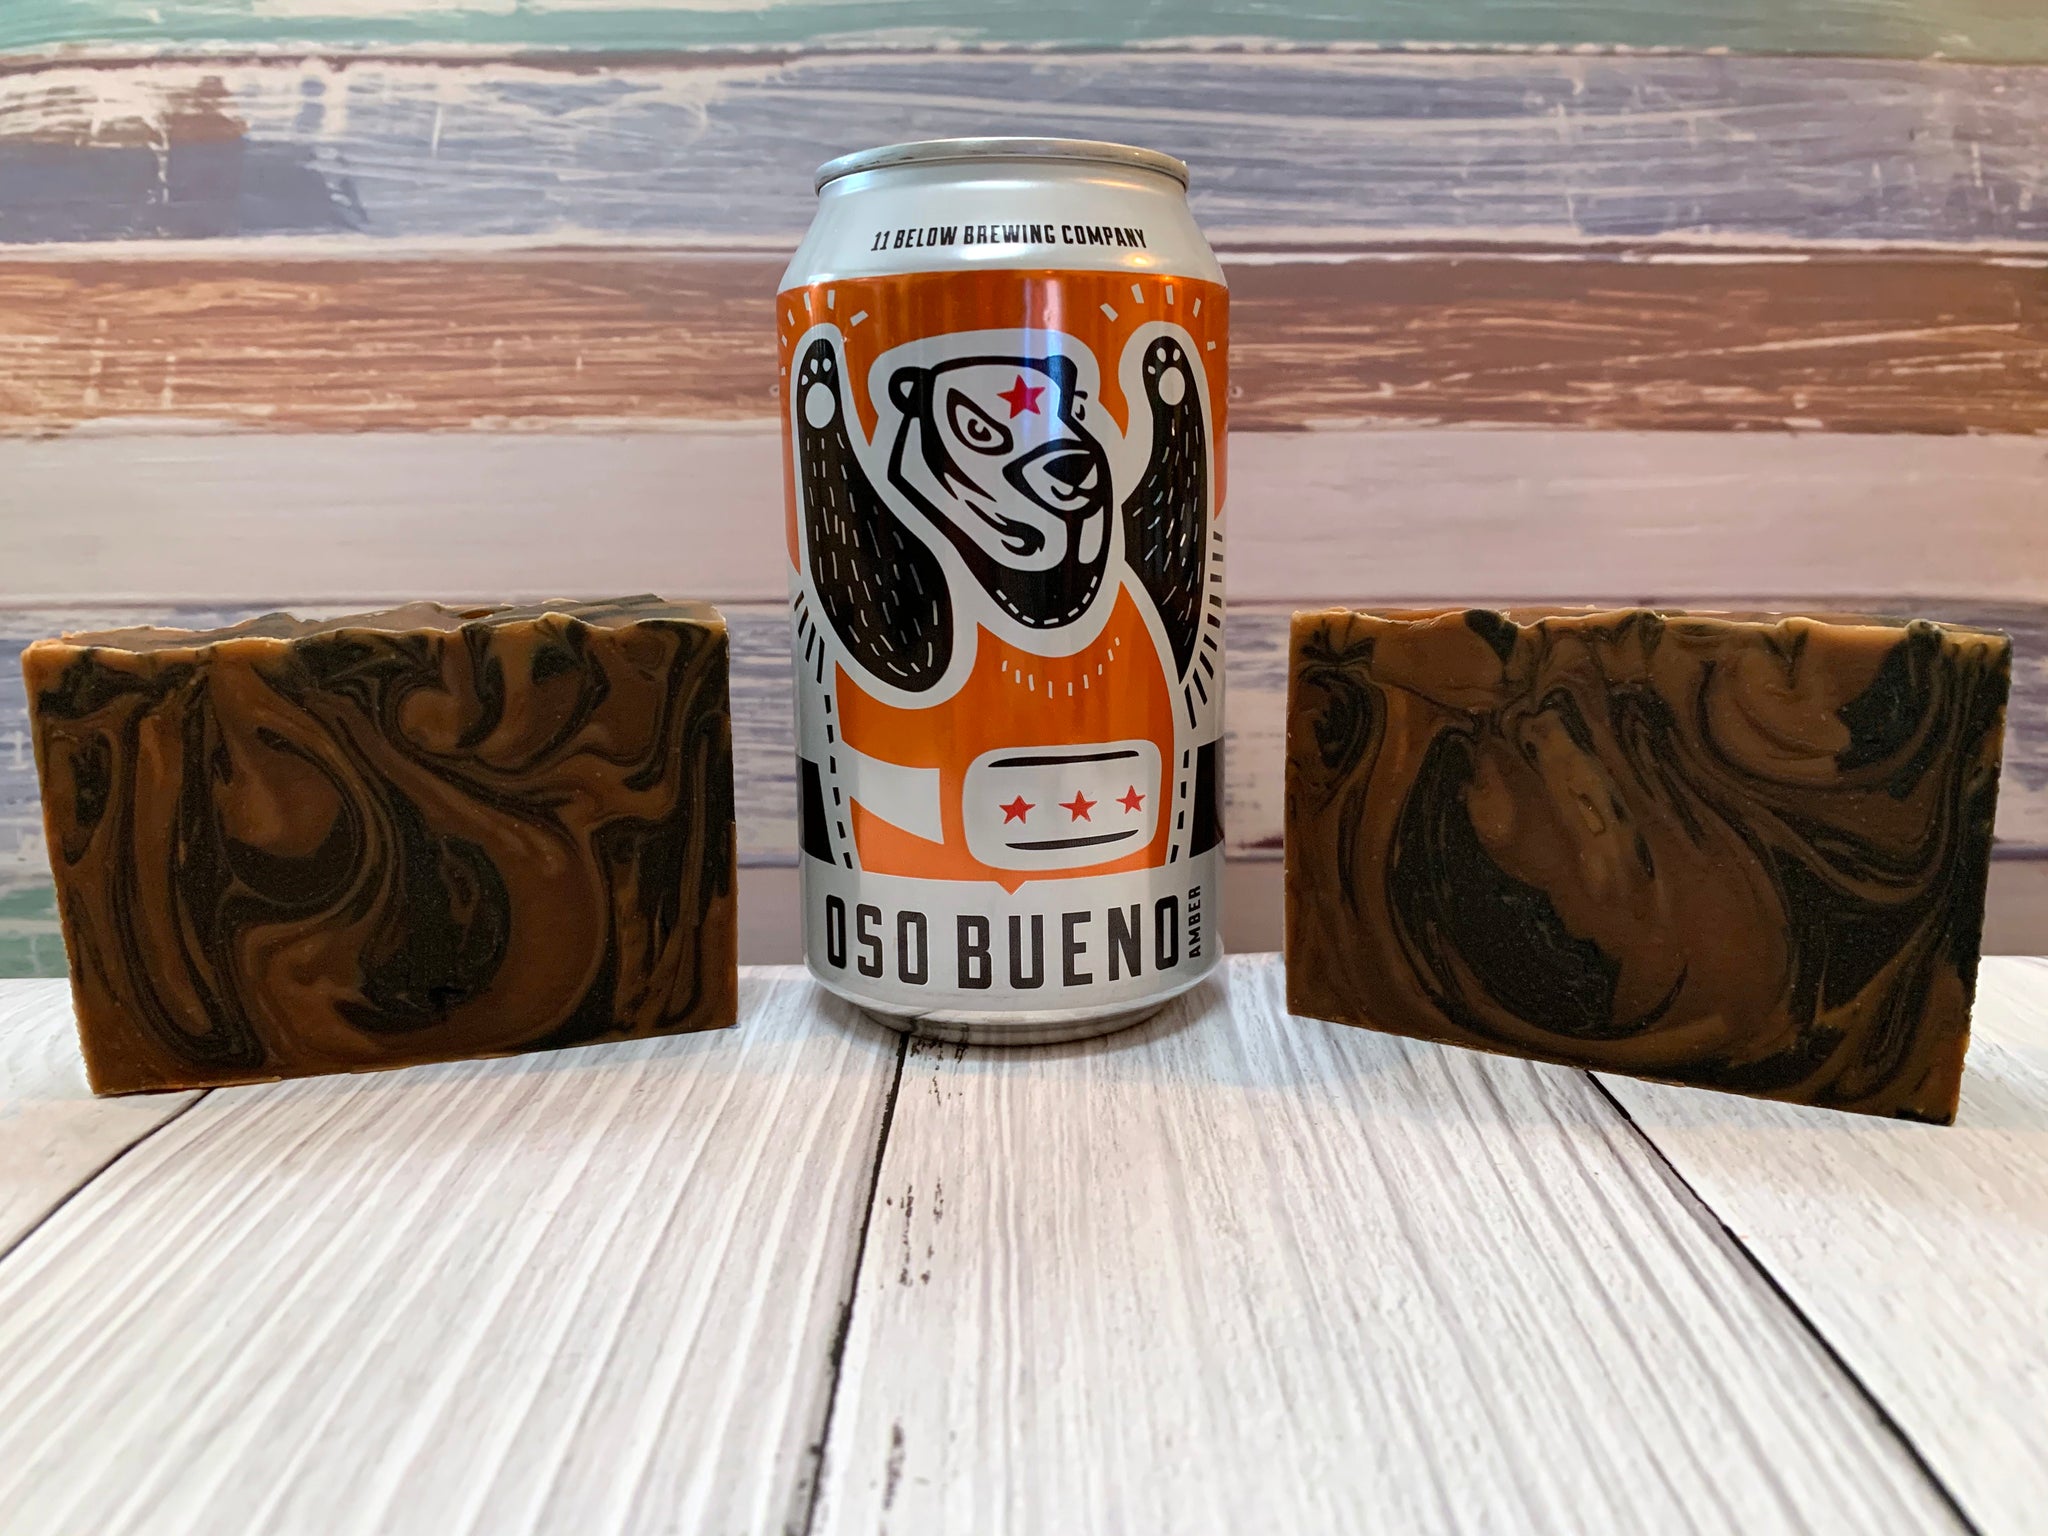  brown beer soap handcrafted in texas with oso bueno amber ale from 11 below brewing company texas craft beer soap by spunkndisorderly craft beer soaps for sale